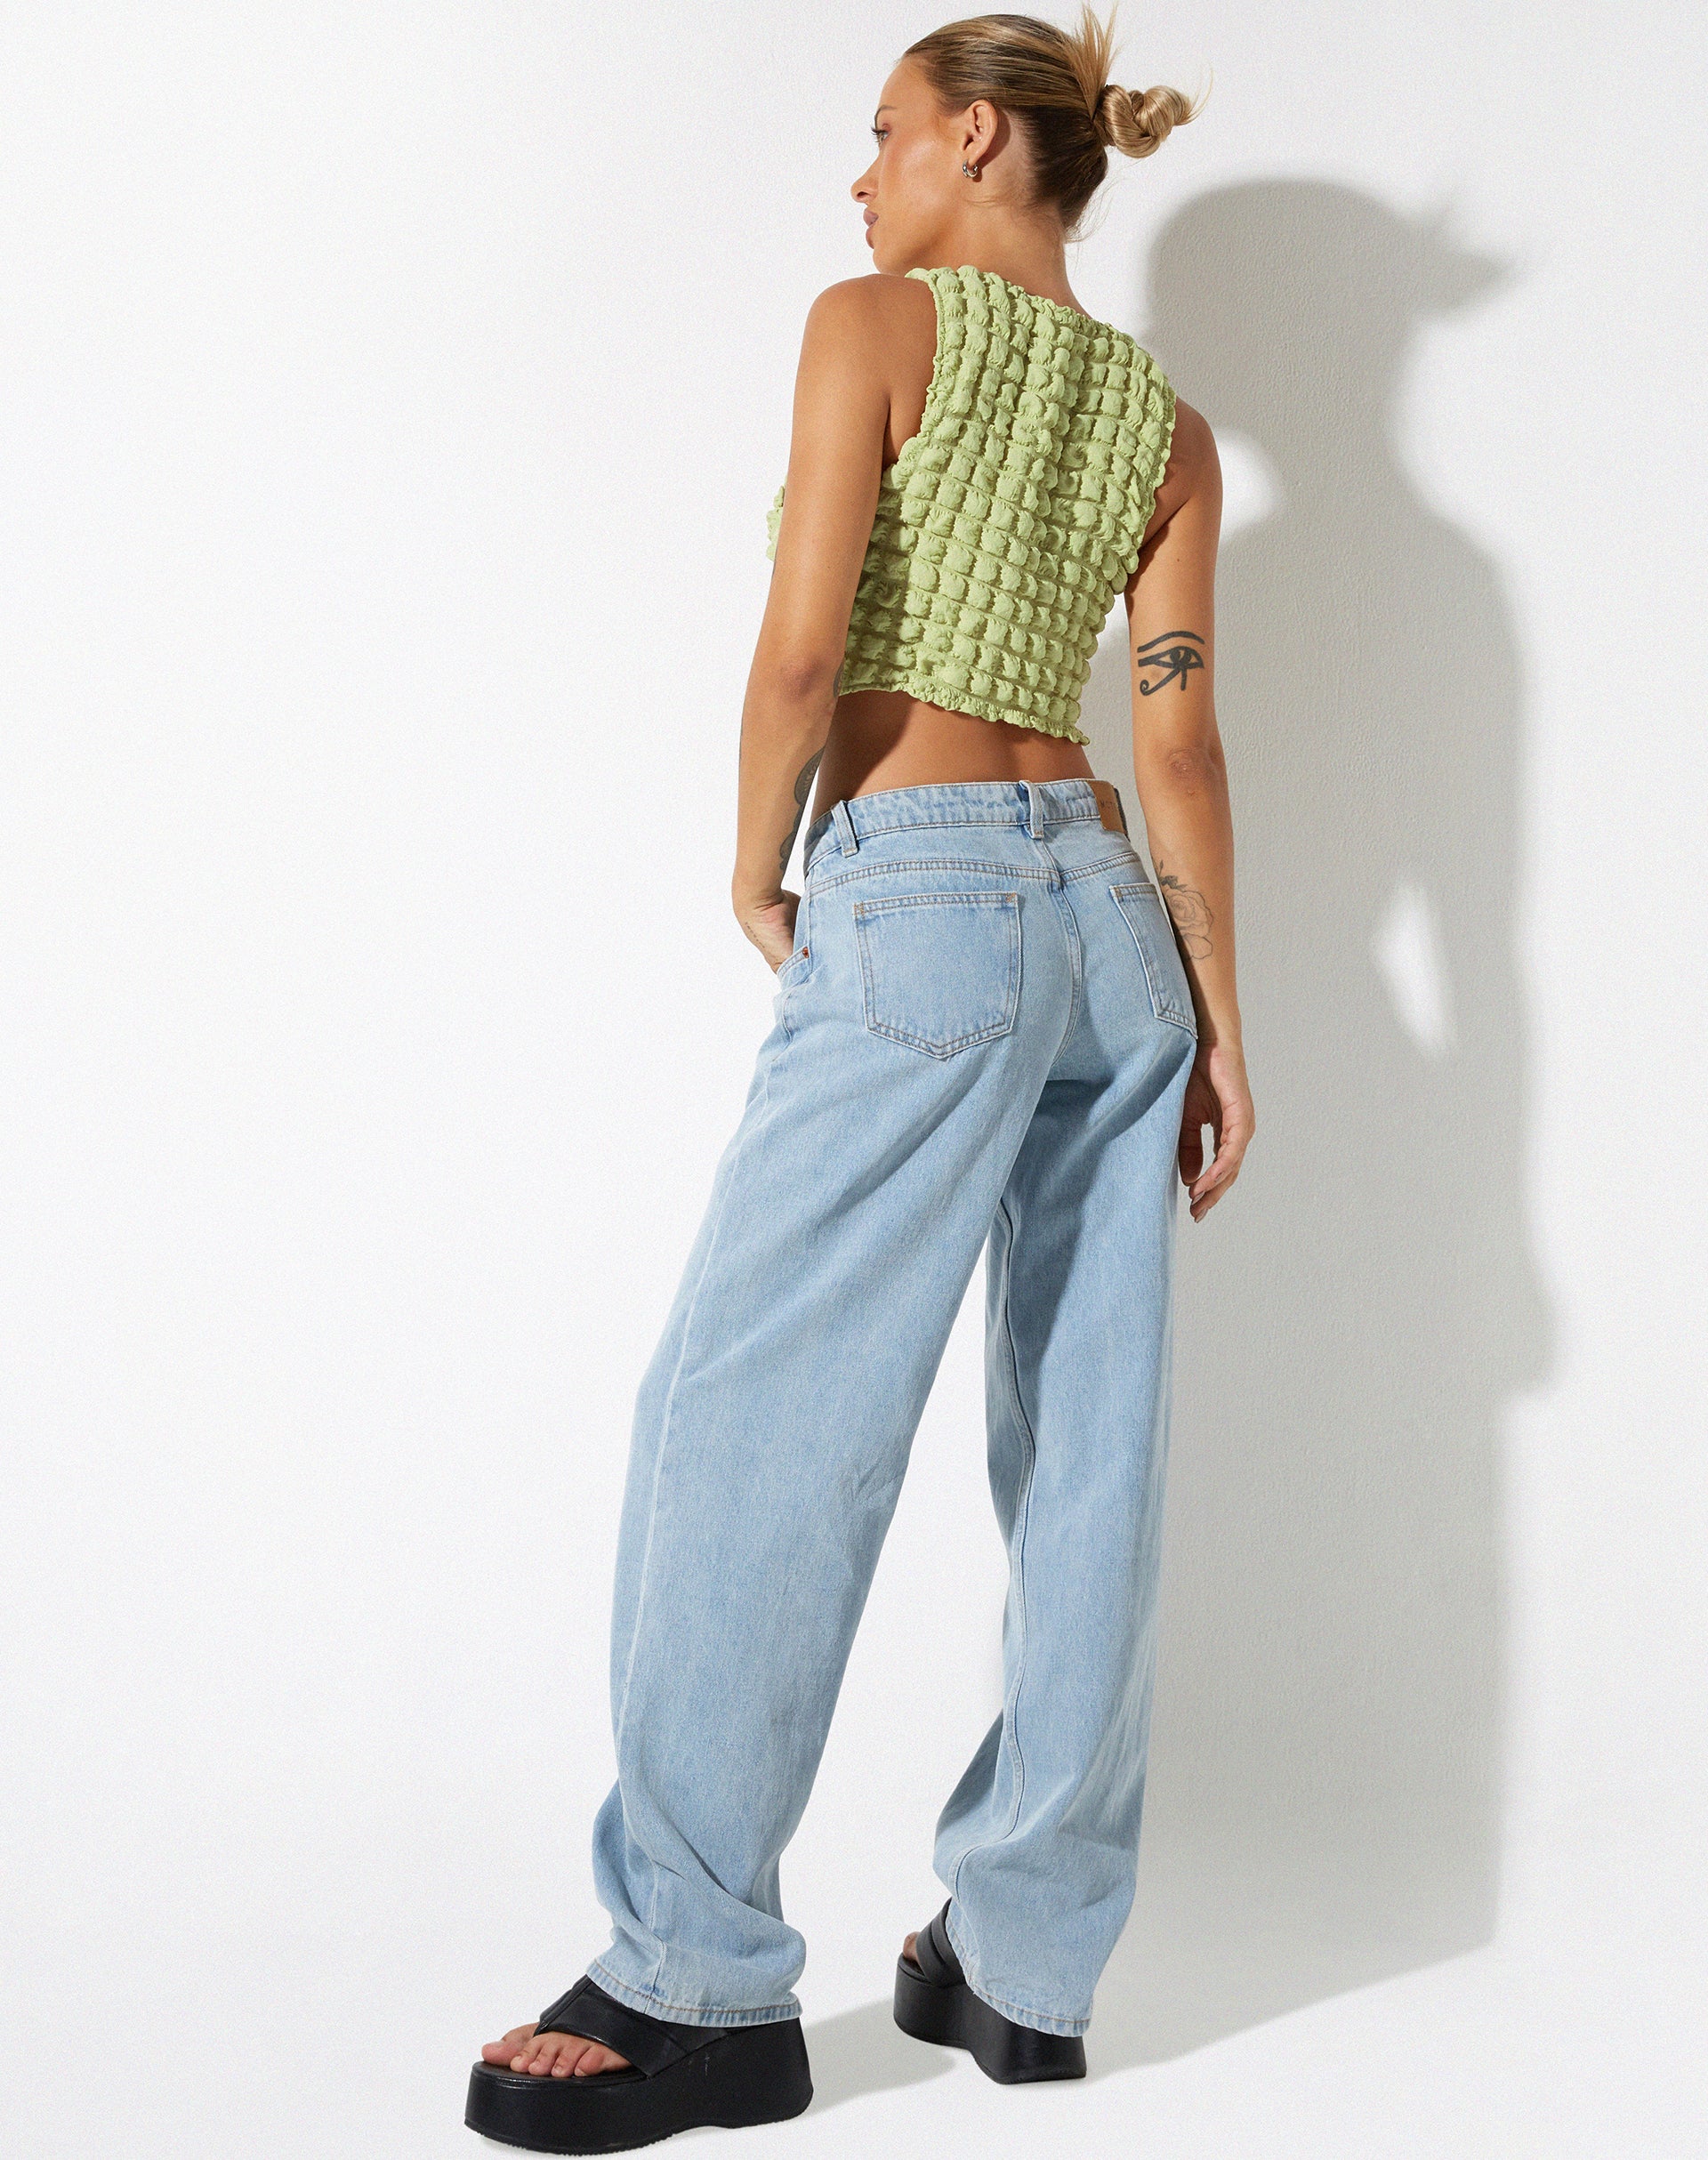 image of Neno Crop Top in Big Bubble Jersey Pastel Lime